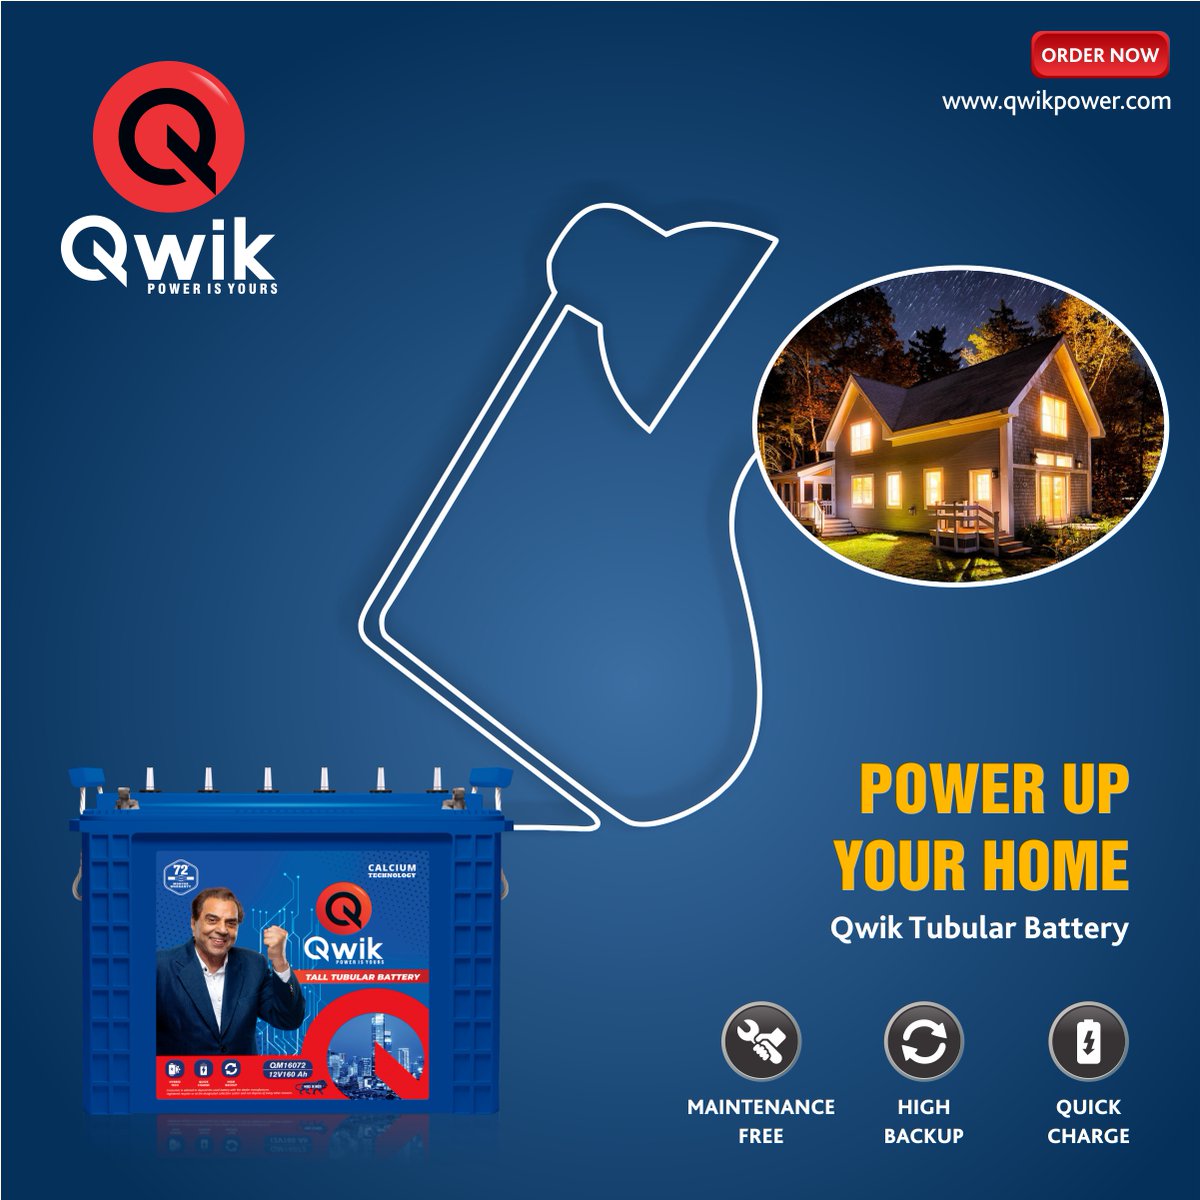 Power up Your Home use our best Qwik Tubular battery.It gives More Lighting,Maintenancefree,Highbackup and Quickcharge.
Know More:
qwikpower.com
#battery #qwikbattery #tubularbattery #batterysafety #maintenancefree #highbackup #quickcharge  #batterydealer